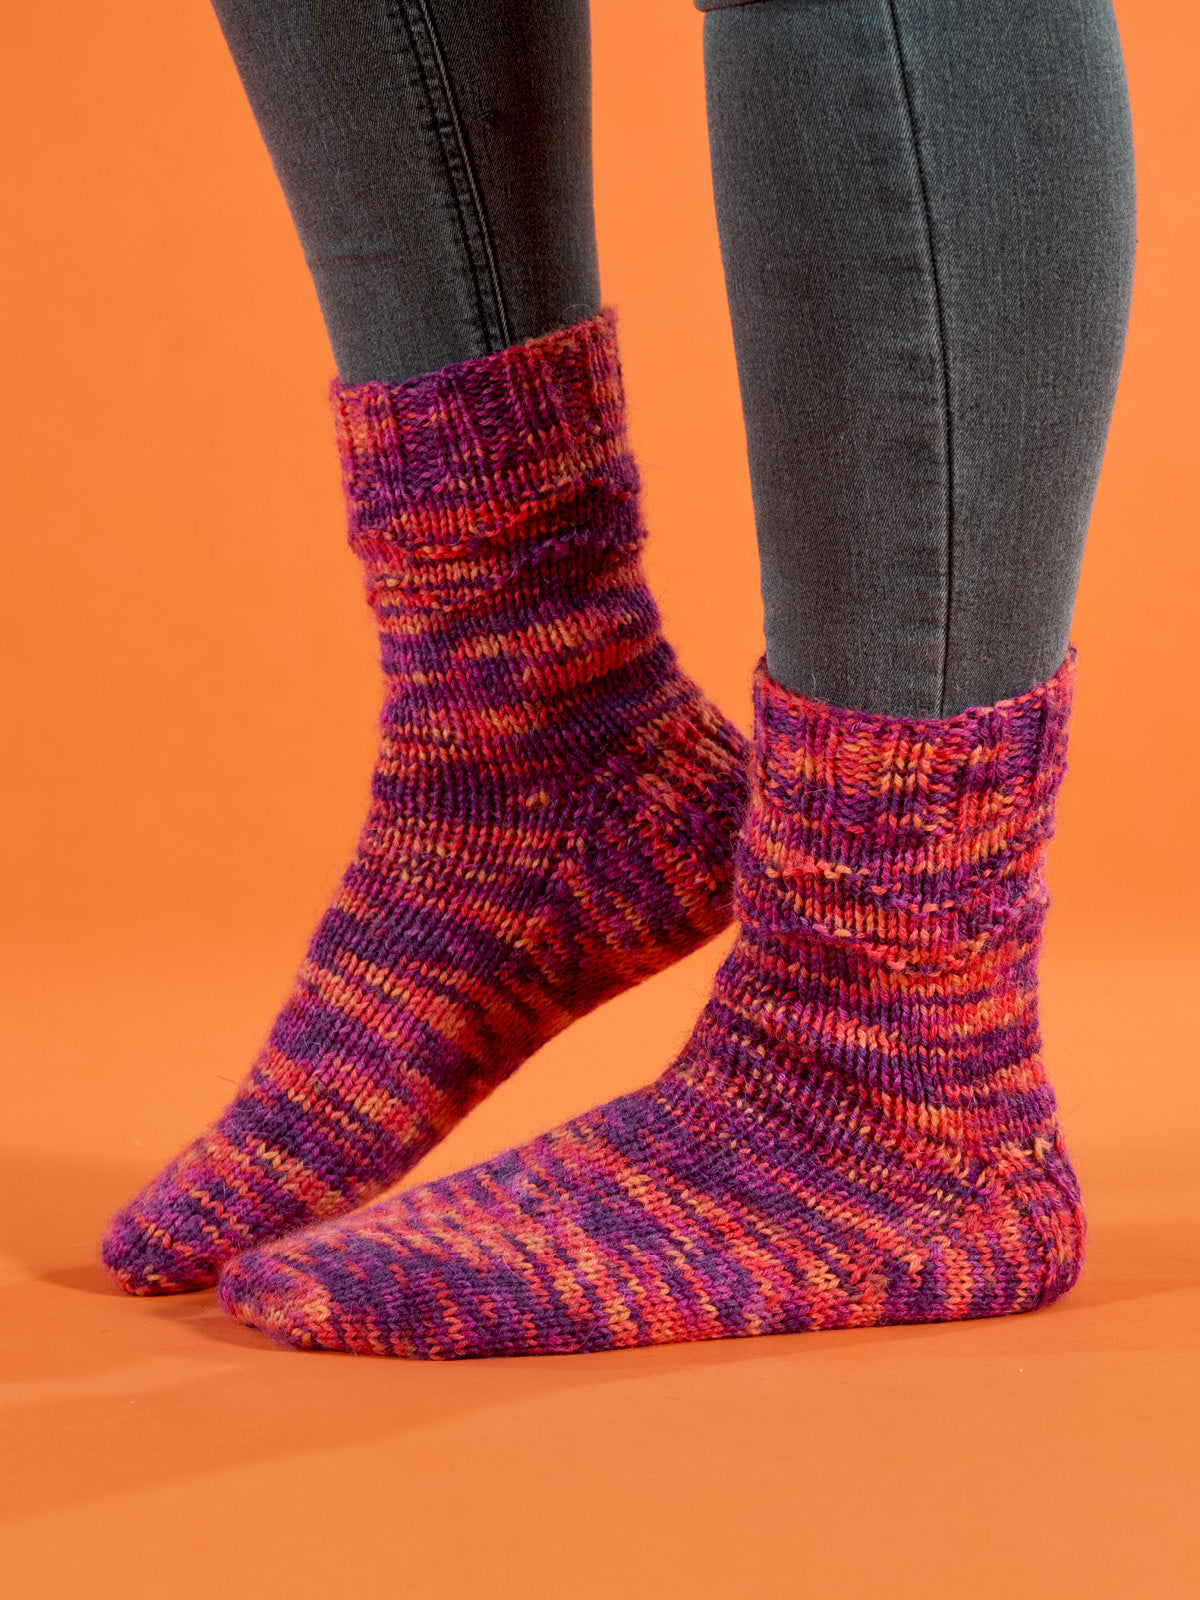 ColourLab Sock DK Wool - Good Vibrations! - West Yorkshire Spinners